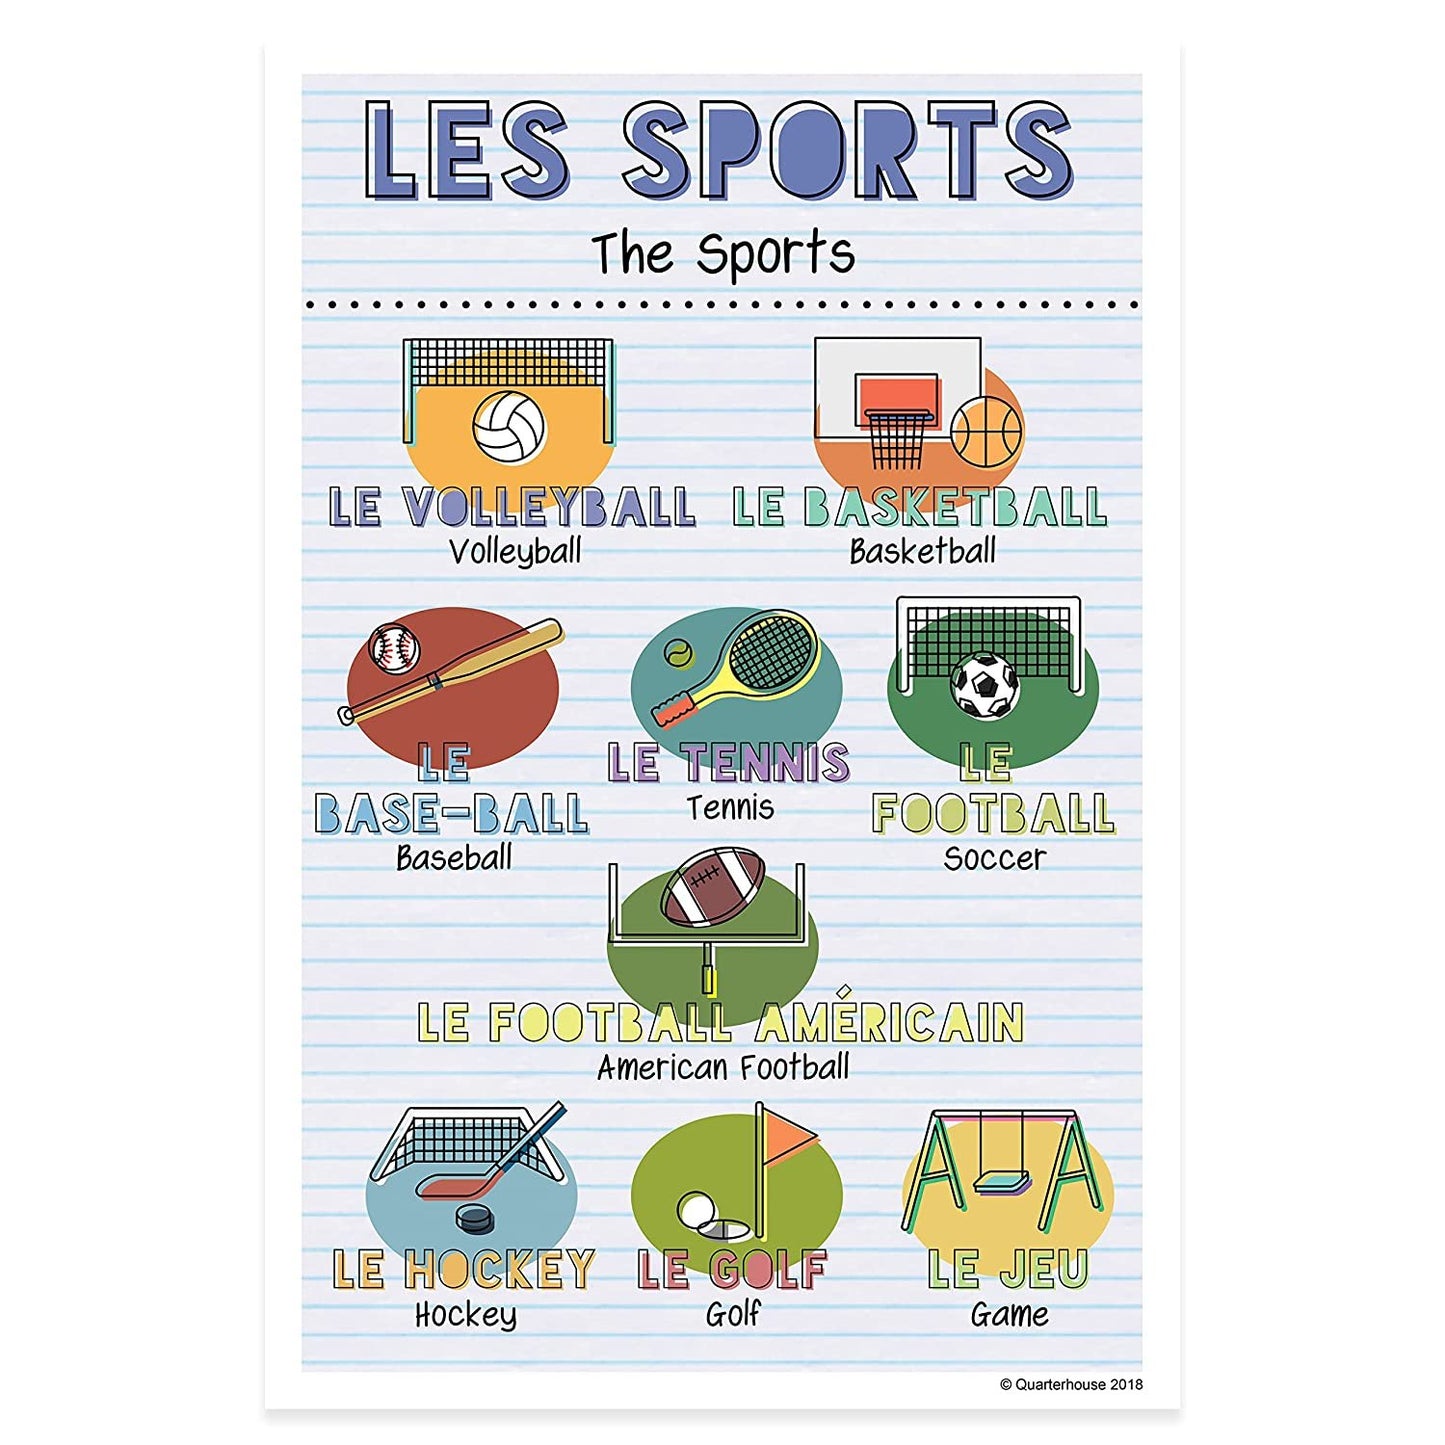 Quarterhouse French Verbs & Beginner Vocabulary (Set E) Poster Set, French Classroom Learning Materials for K-12 Students and Teachers, Set of 11, 12 x 18 Inches, Extra Durable